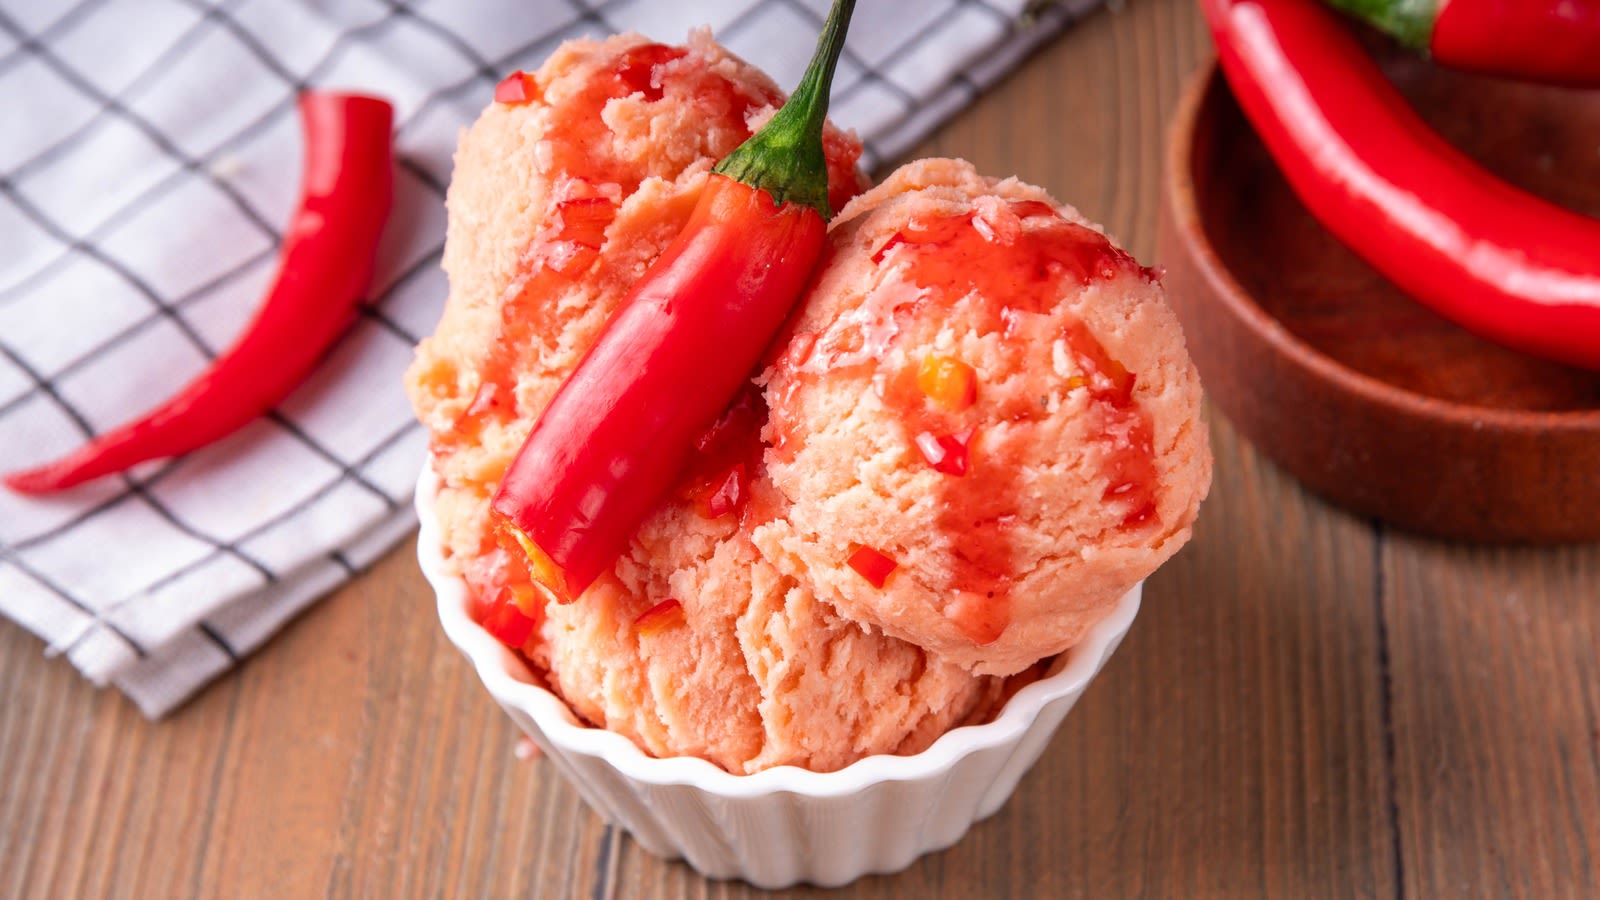 Hot Sauce And Ice Cream Are The Unexpected Pairing To Try This Summer